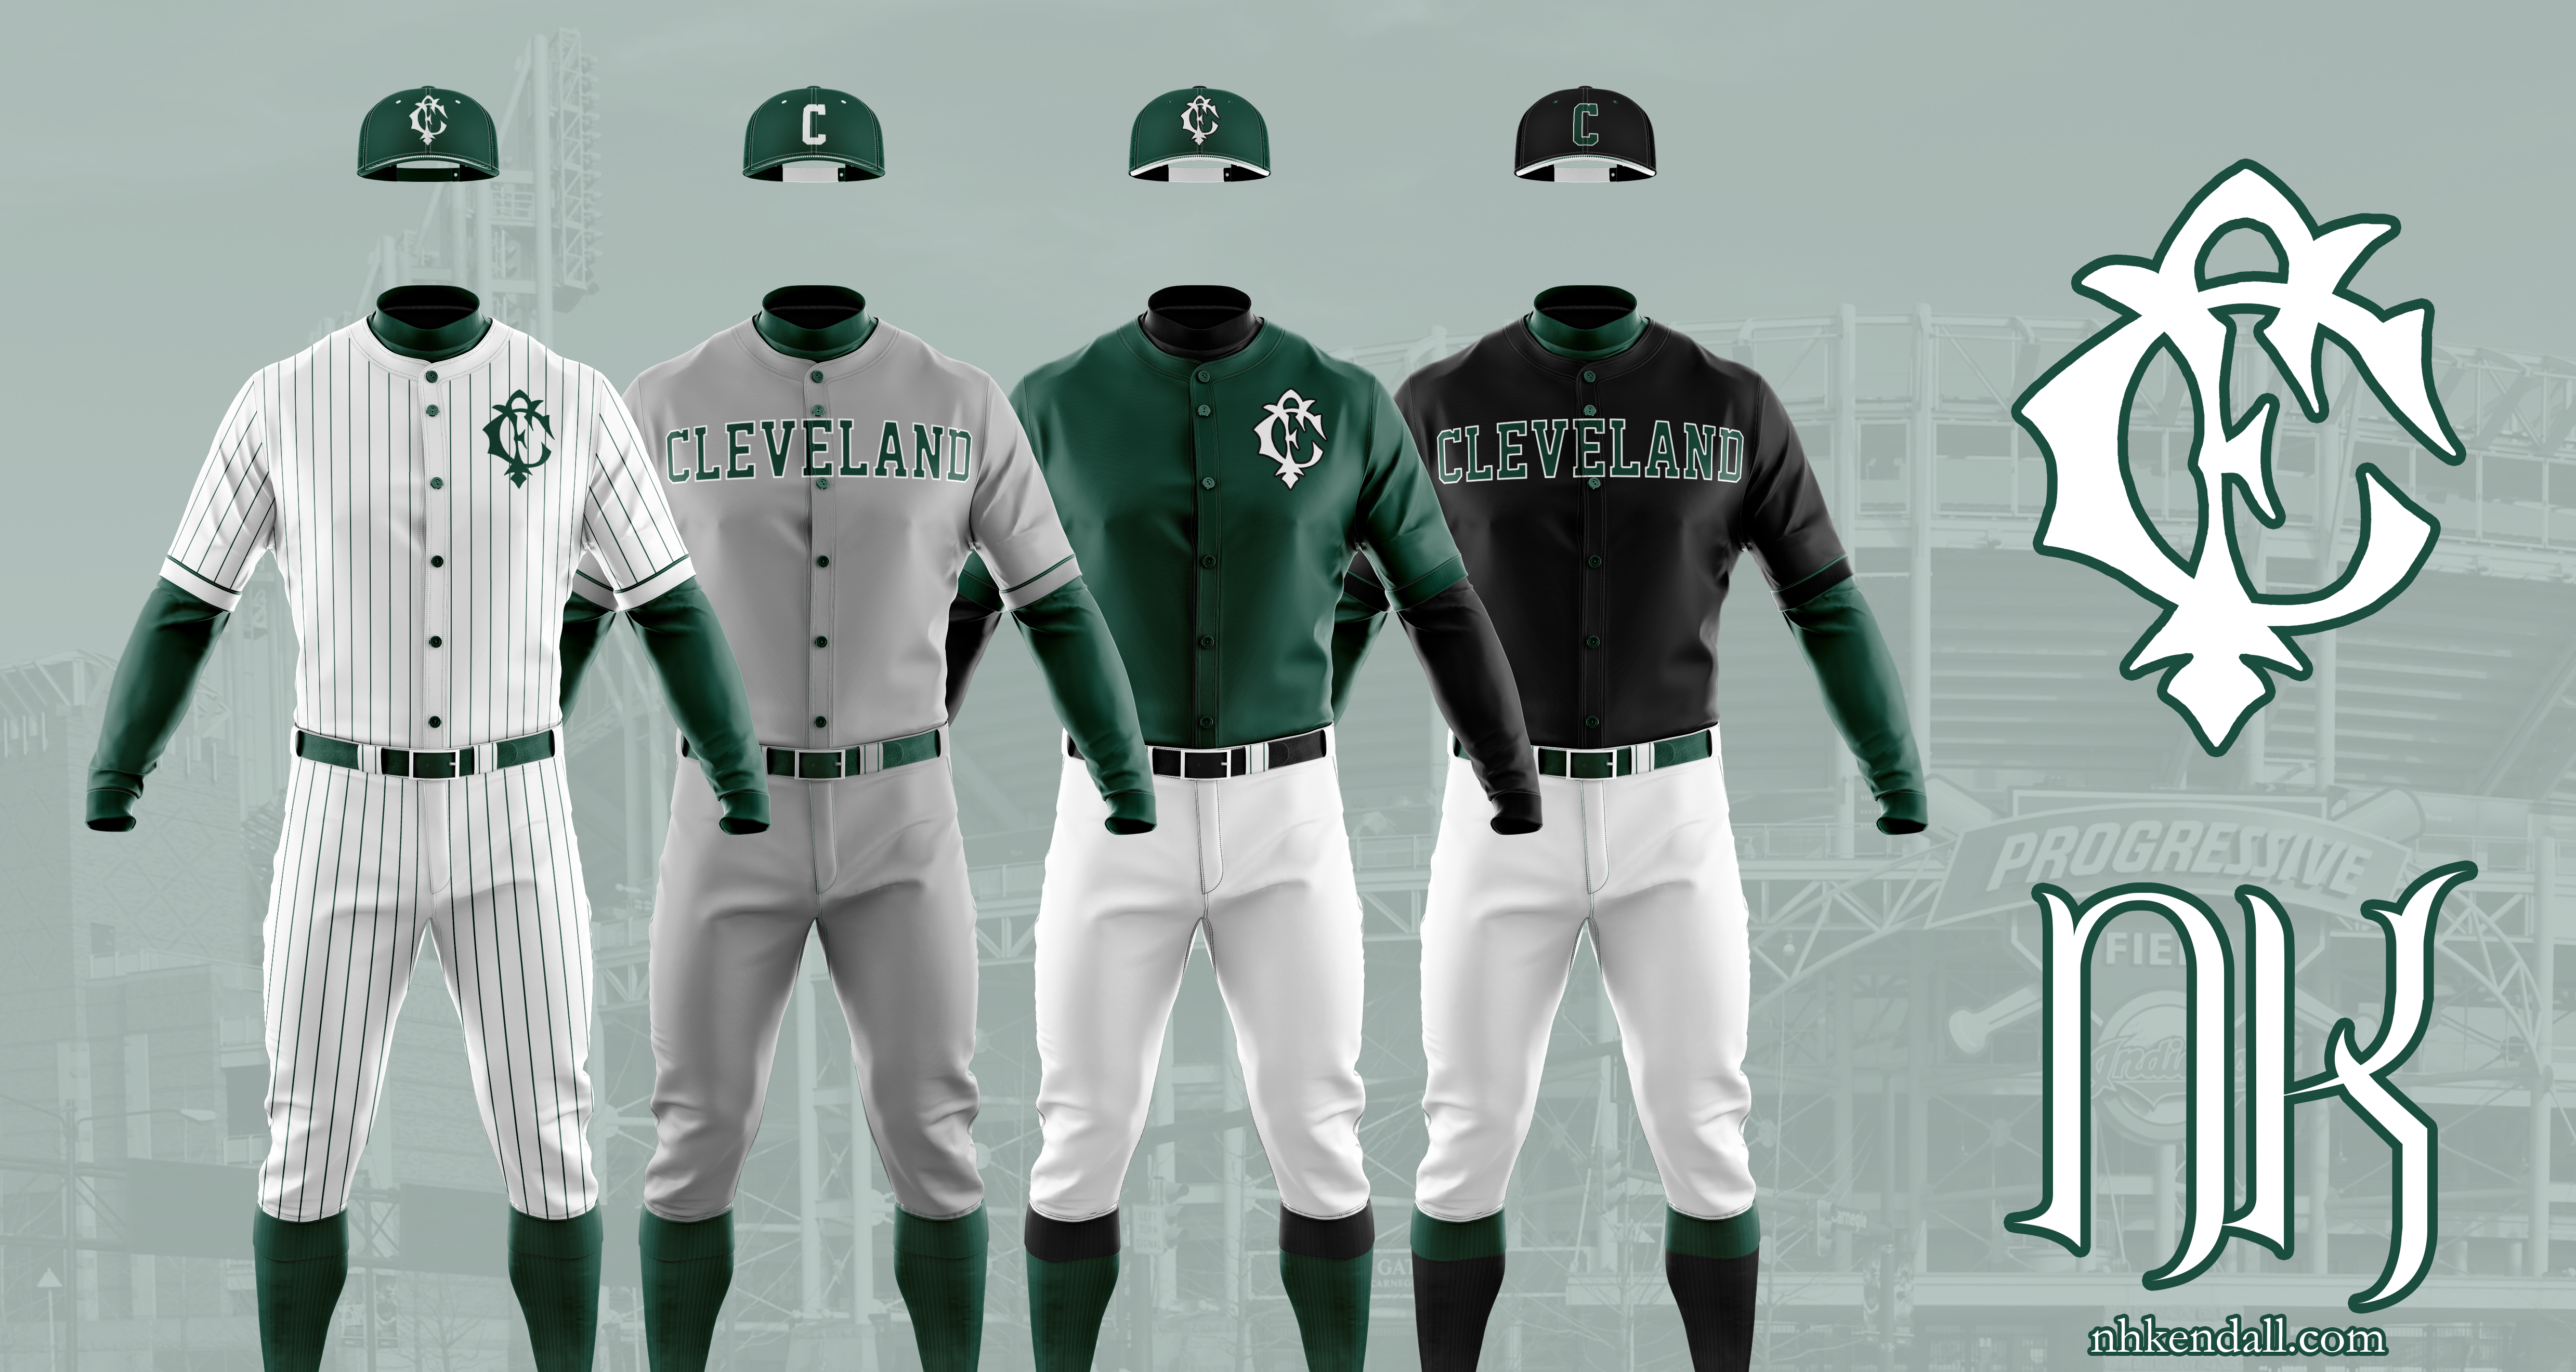 Cleveland Forest Citys (Sports Team)